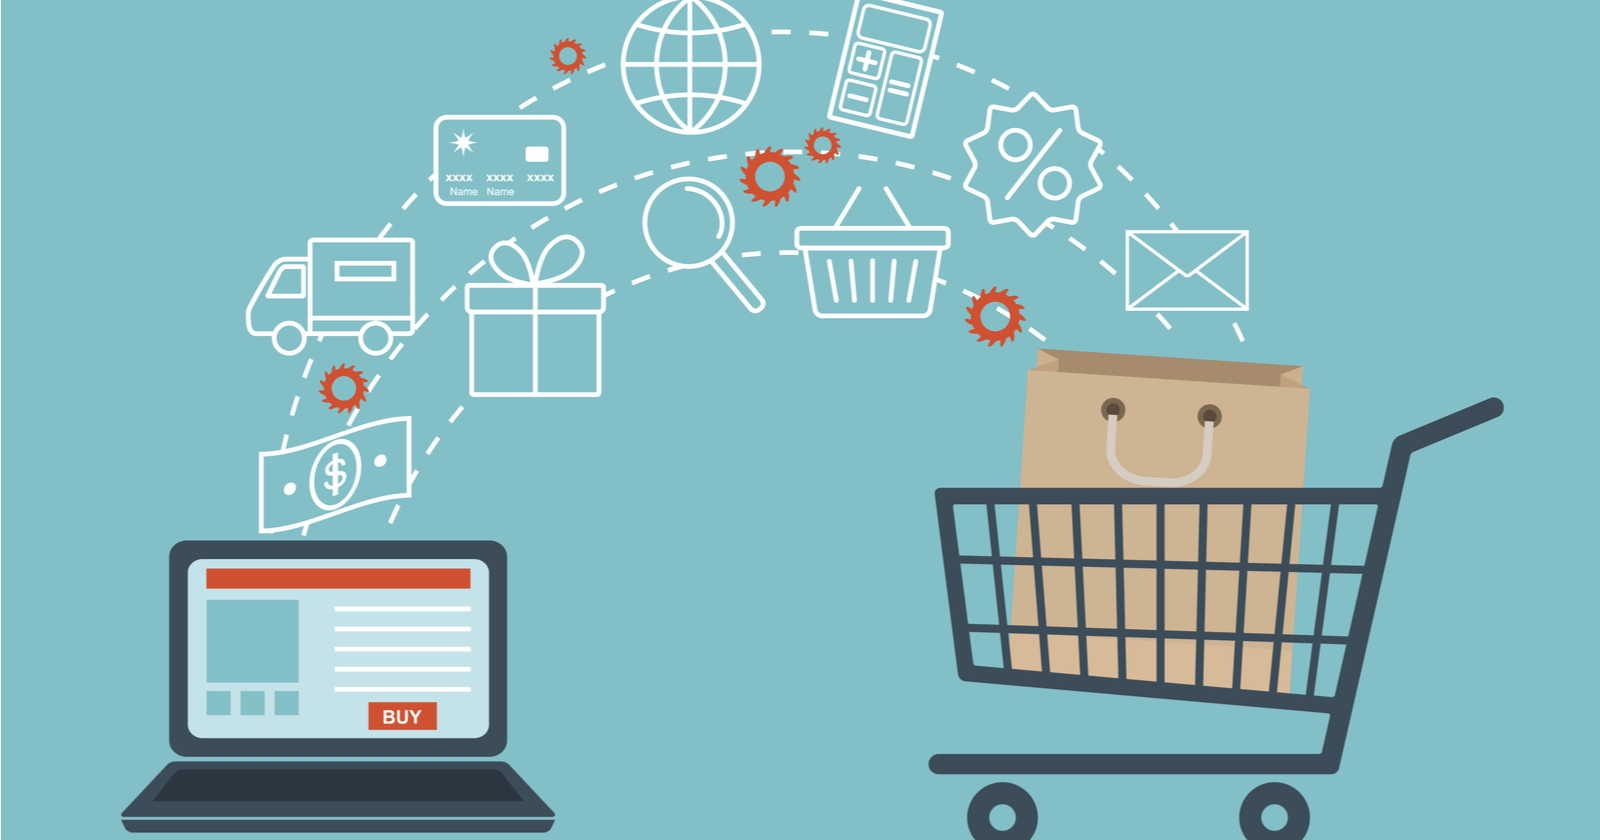 7 Effective Steps to Building an Ecommerce Website